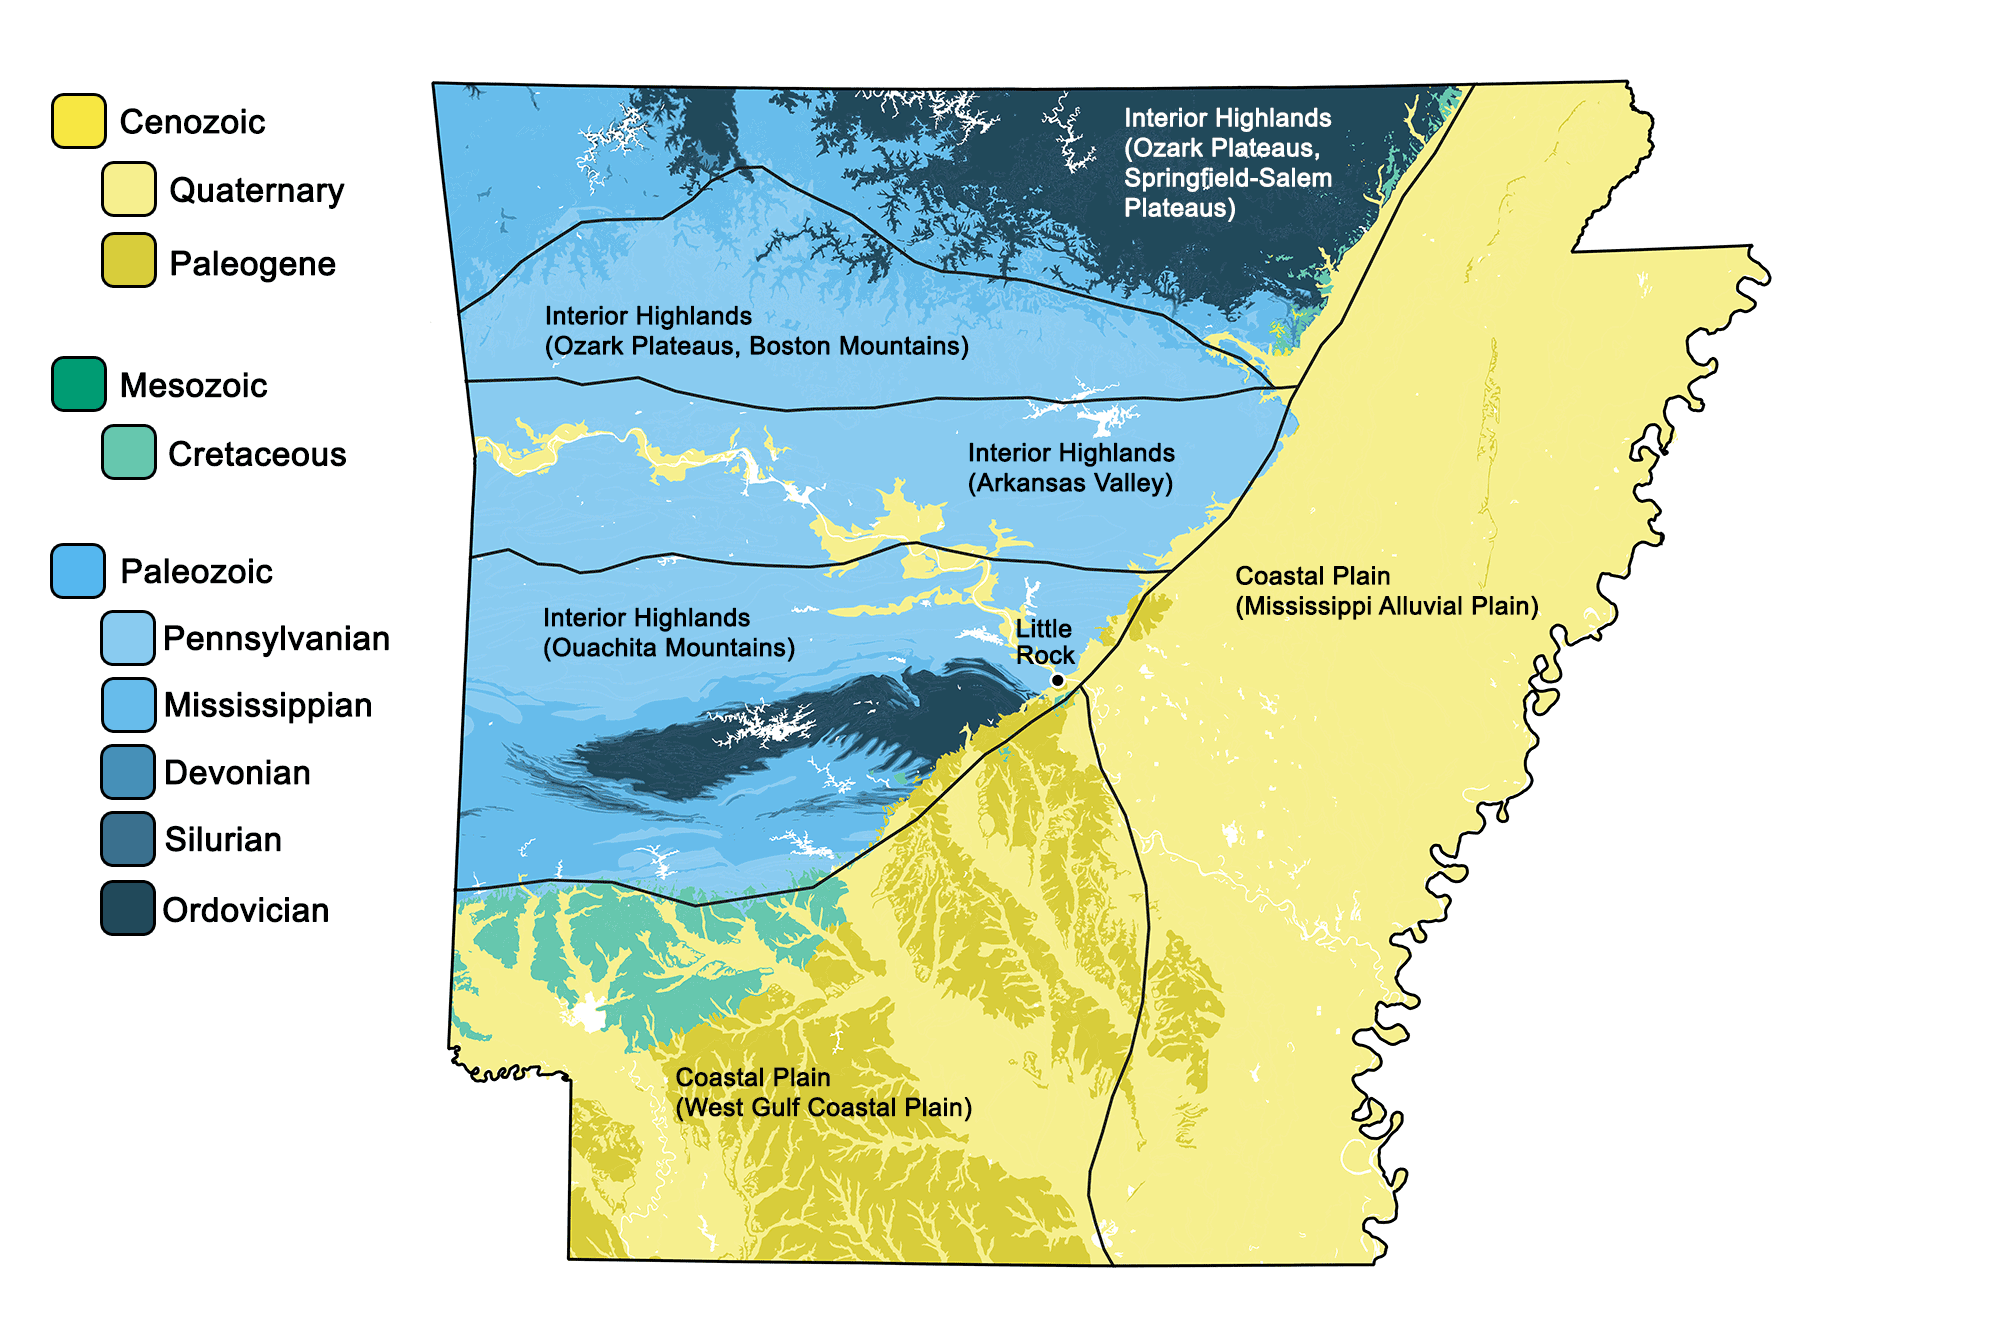 Geologic map of Arkansas with physiographic regions identified.